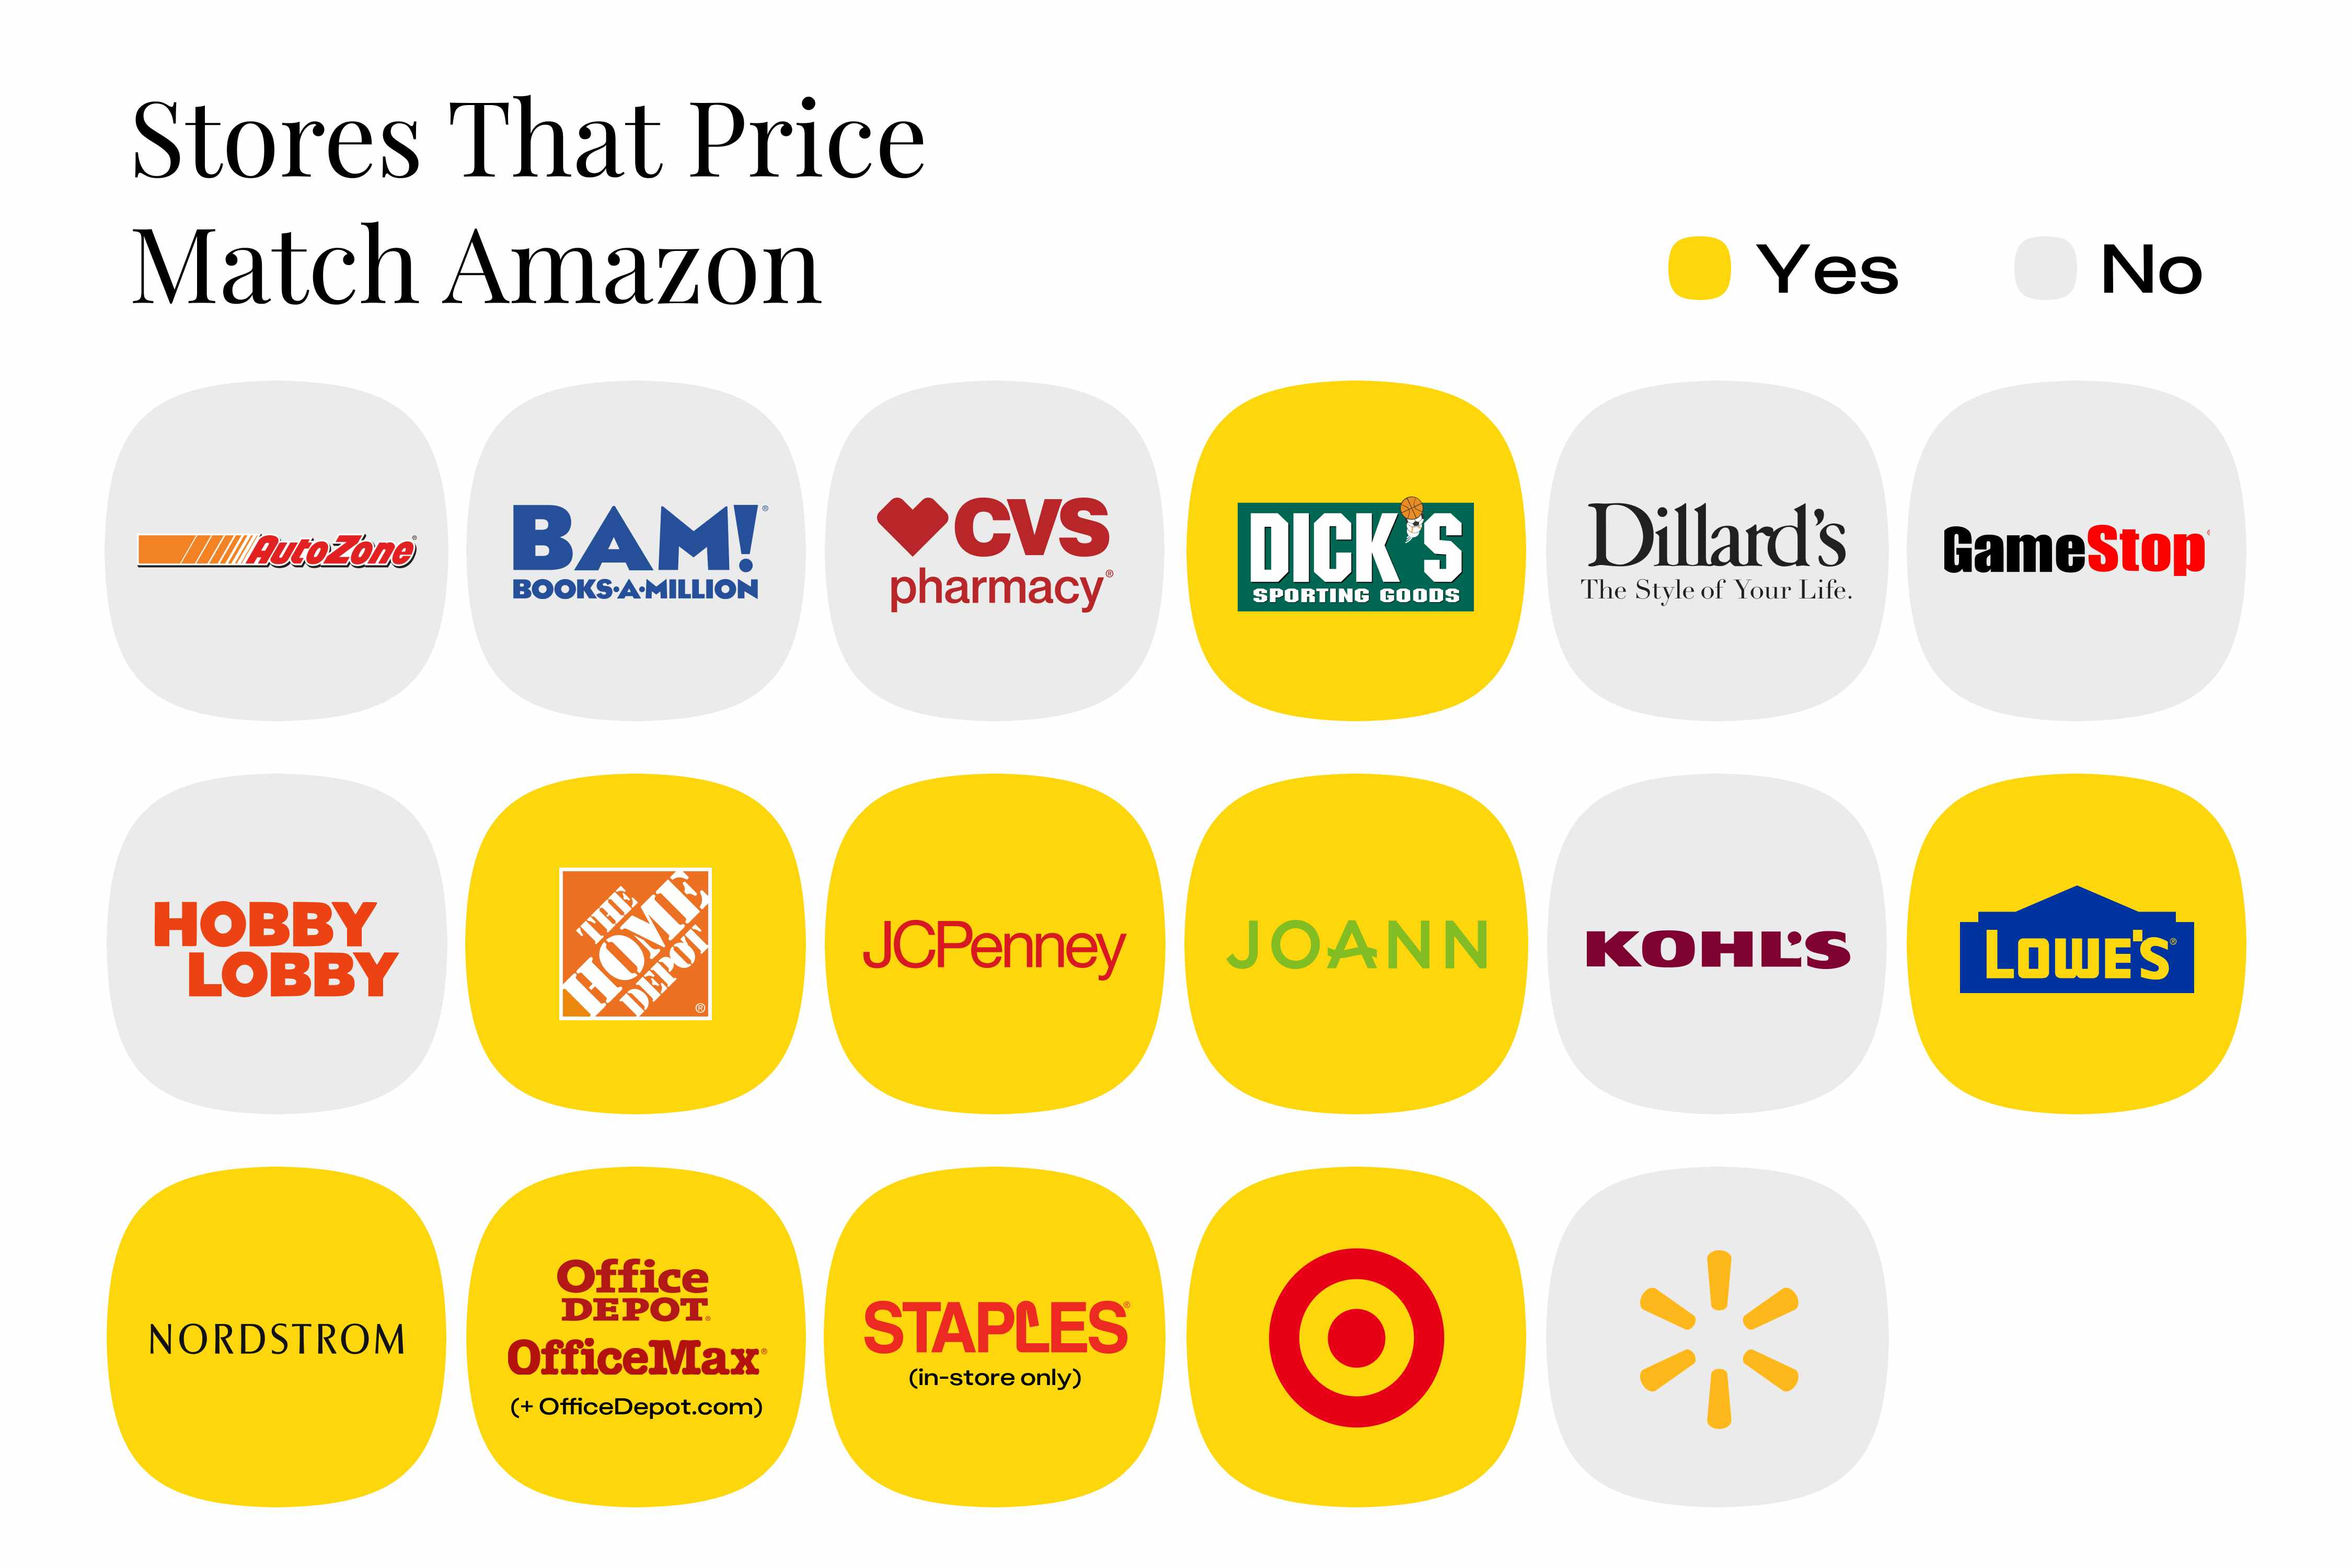 Chart showing the nine stores that will price match with Amazon, including Home Depot and Target.